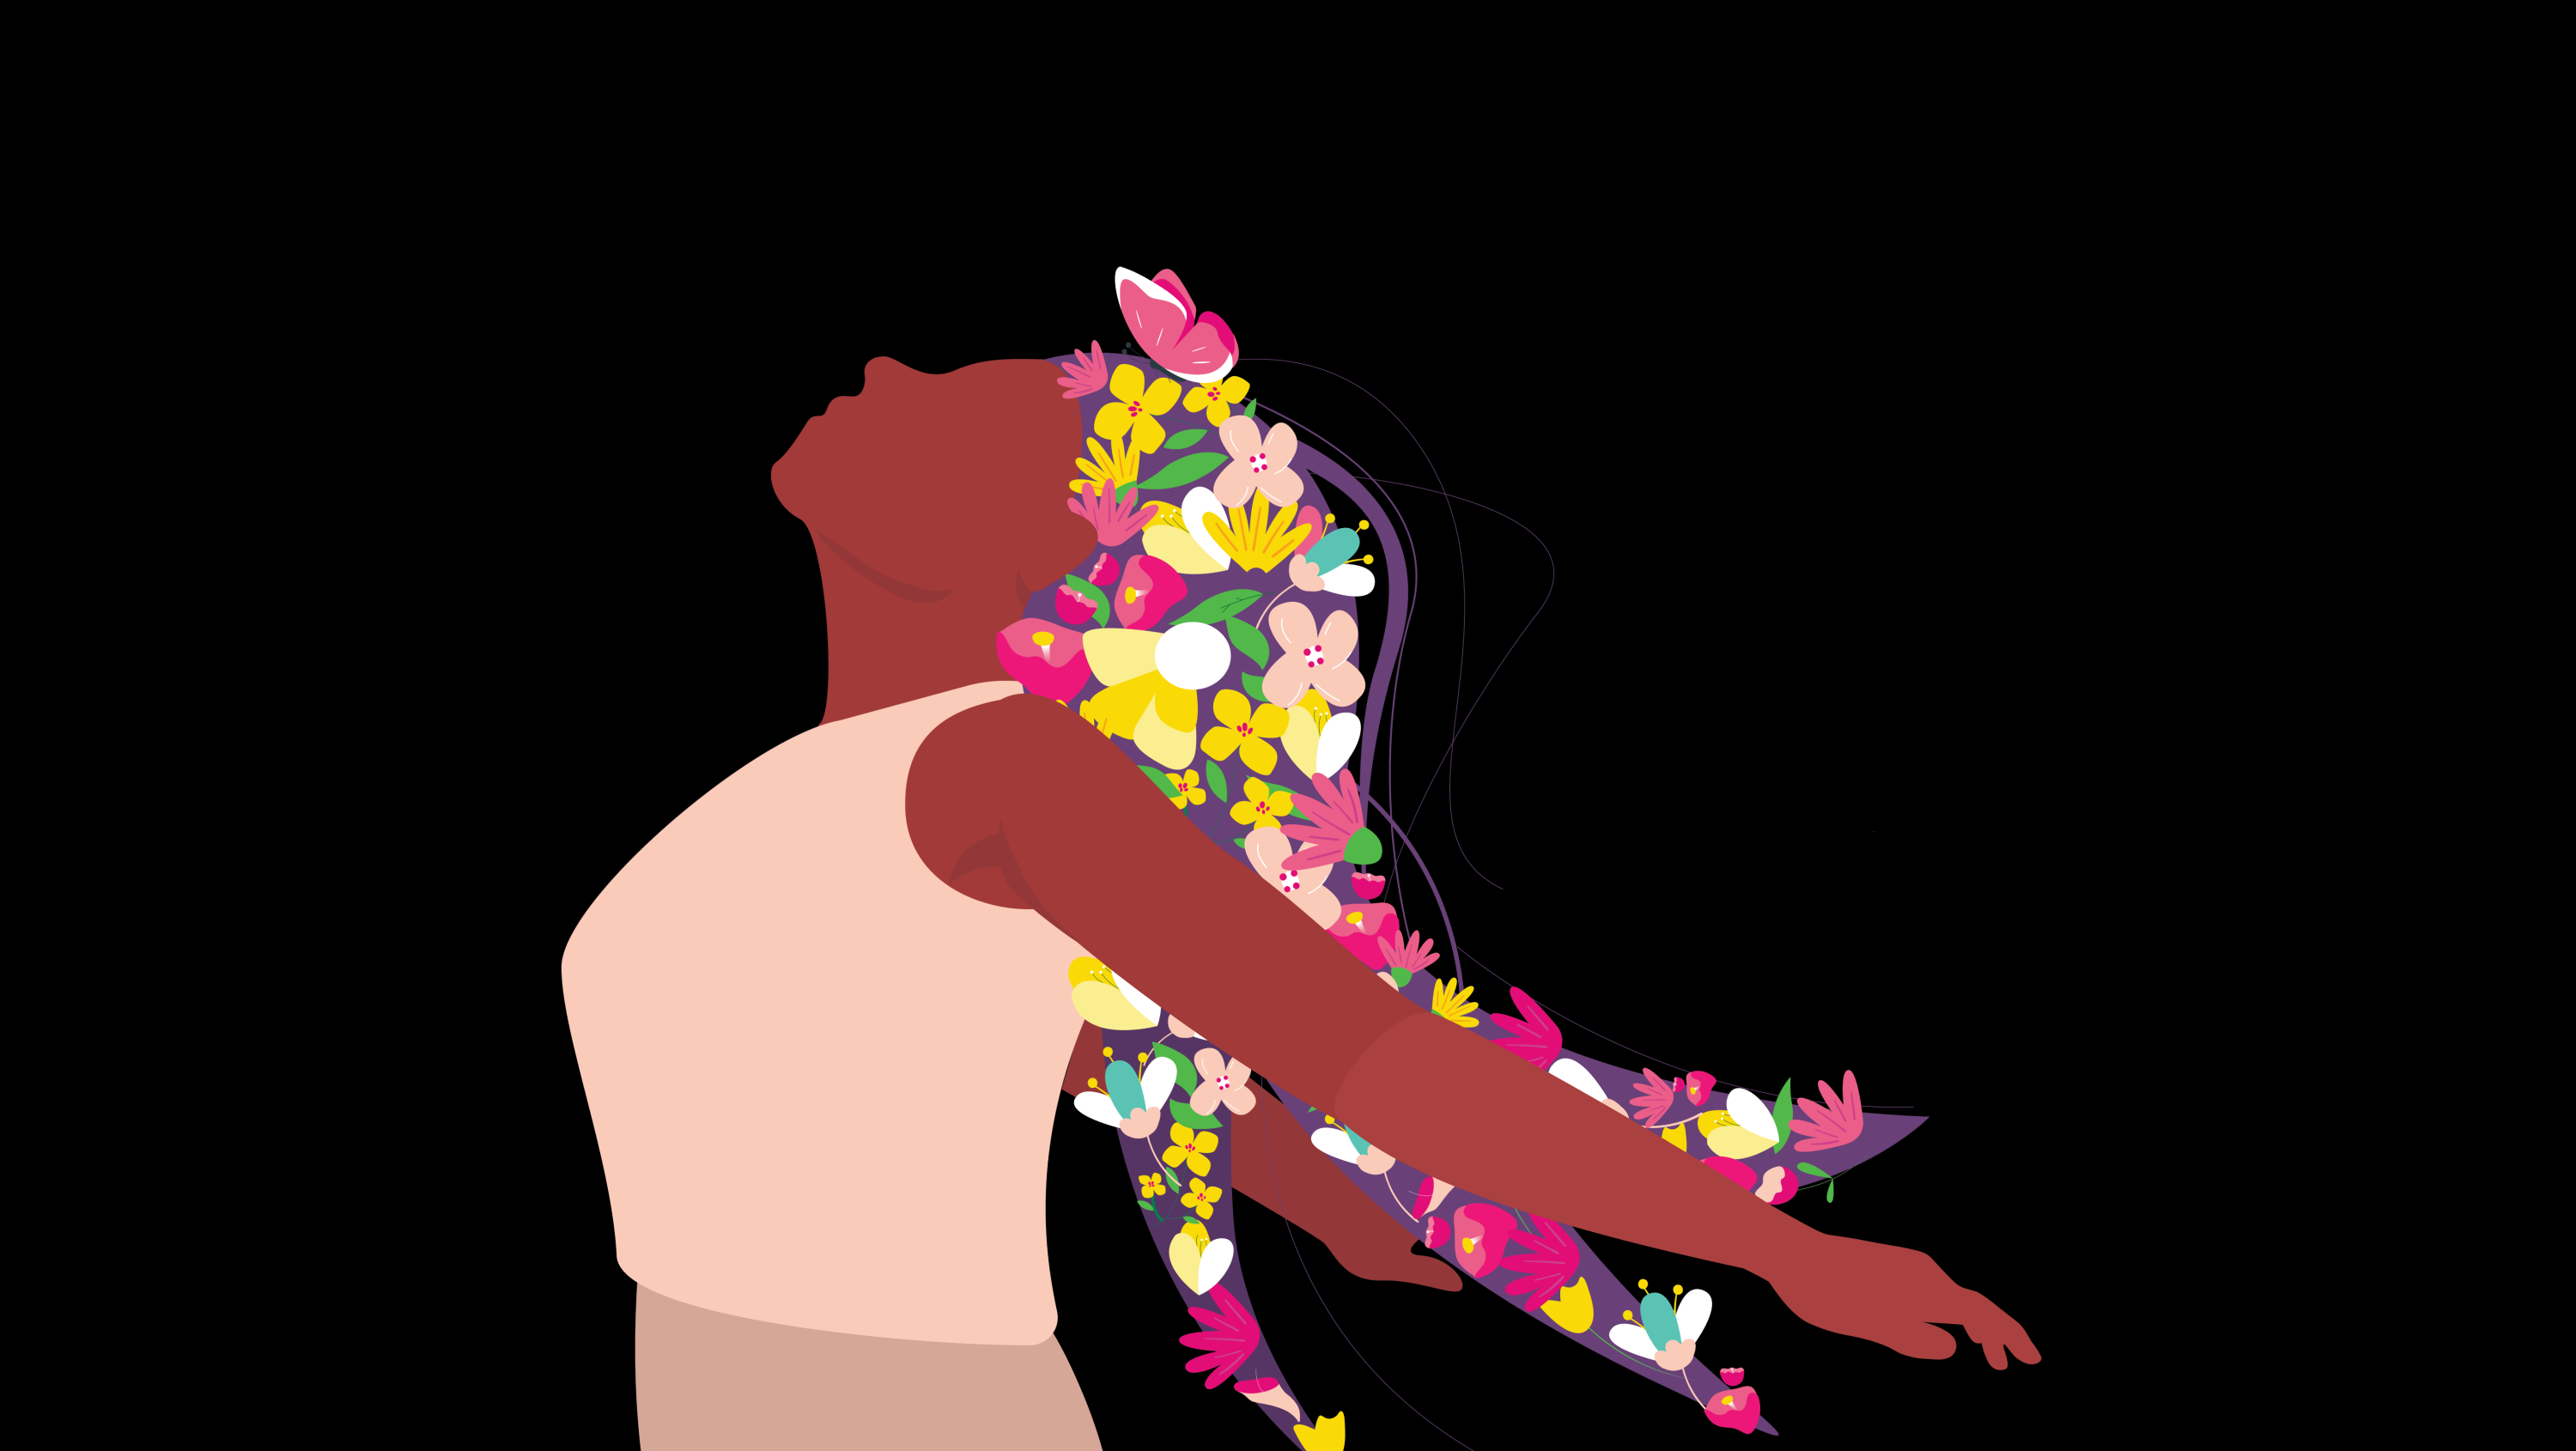 Illustration of woman with flowers in hair, head tilted back, in profile, against black background, representing the embodiment of Environmental, Social and Governance.